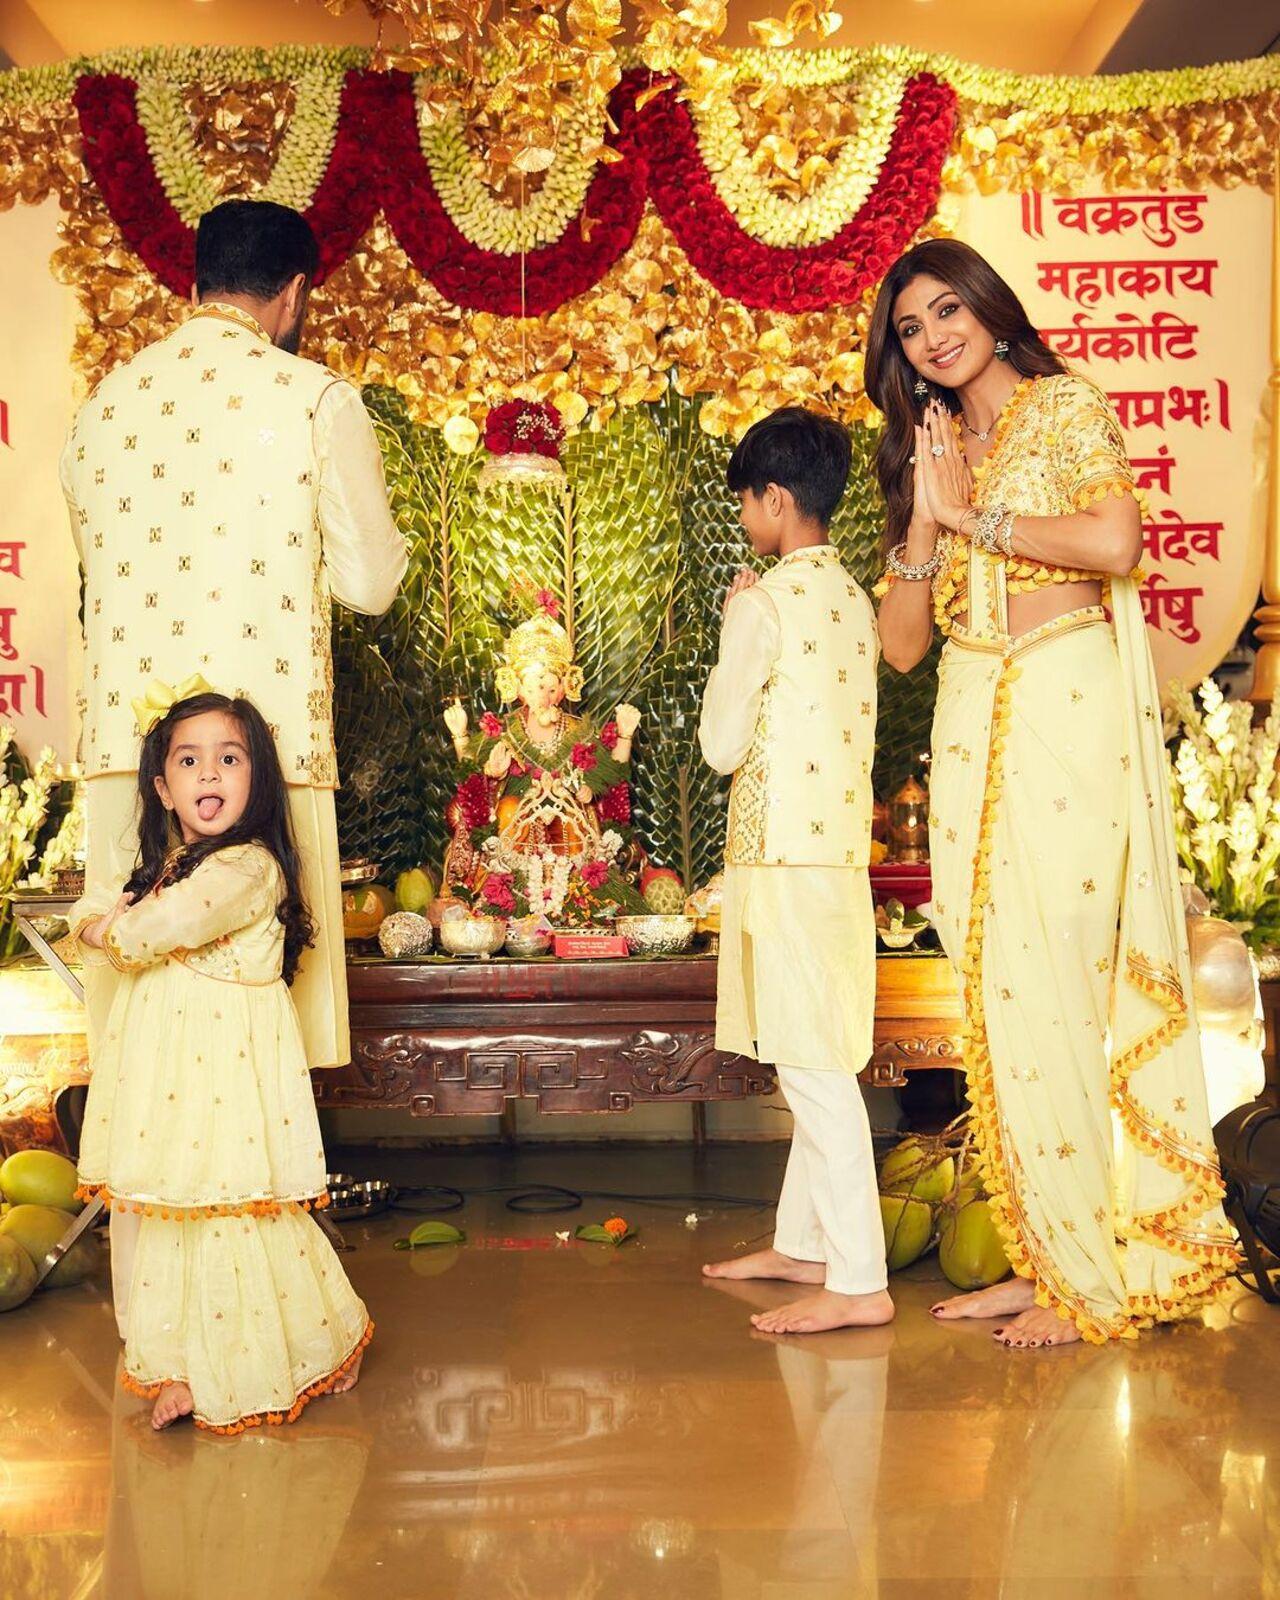 Shilpa Shetty and Raj Kundra with their kids in co-ordinated outfits worship their Ganpati idol at home